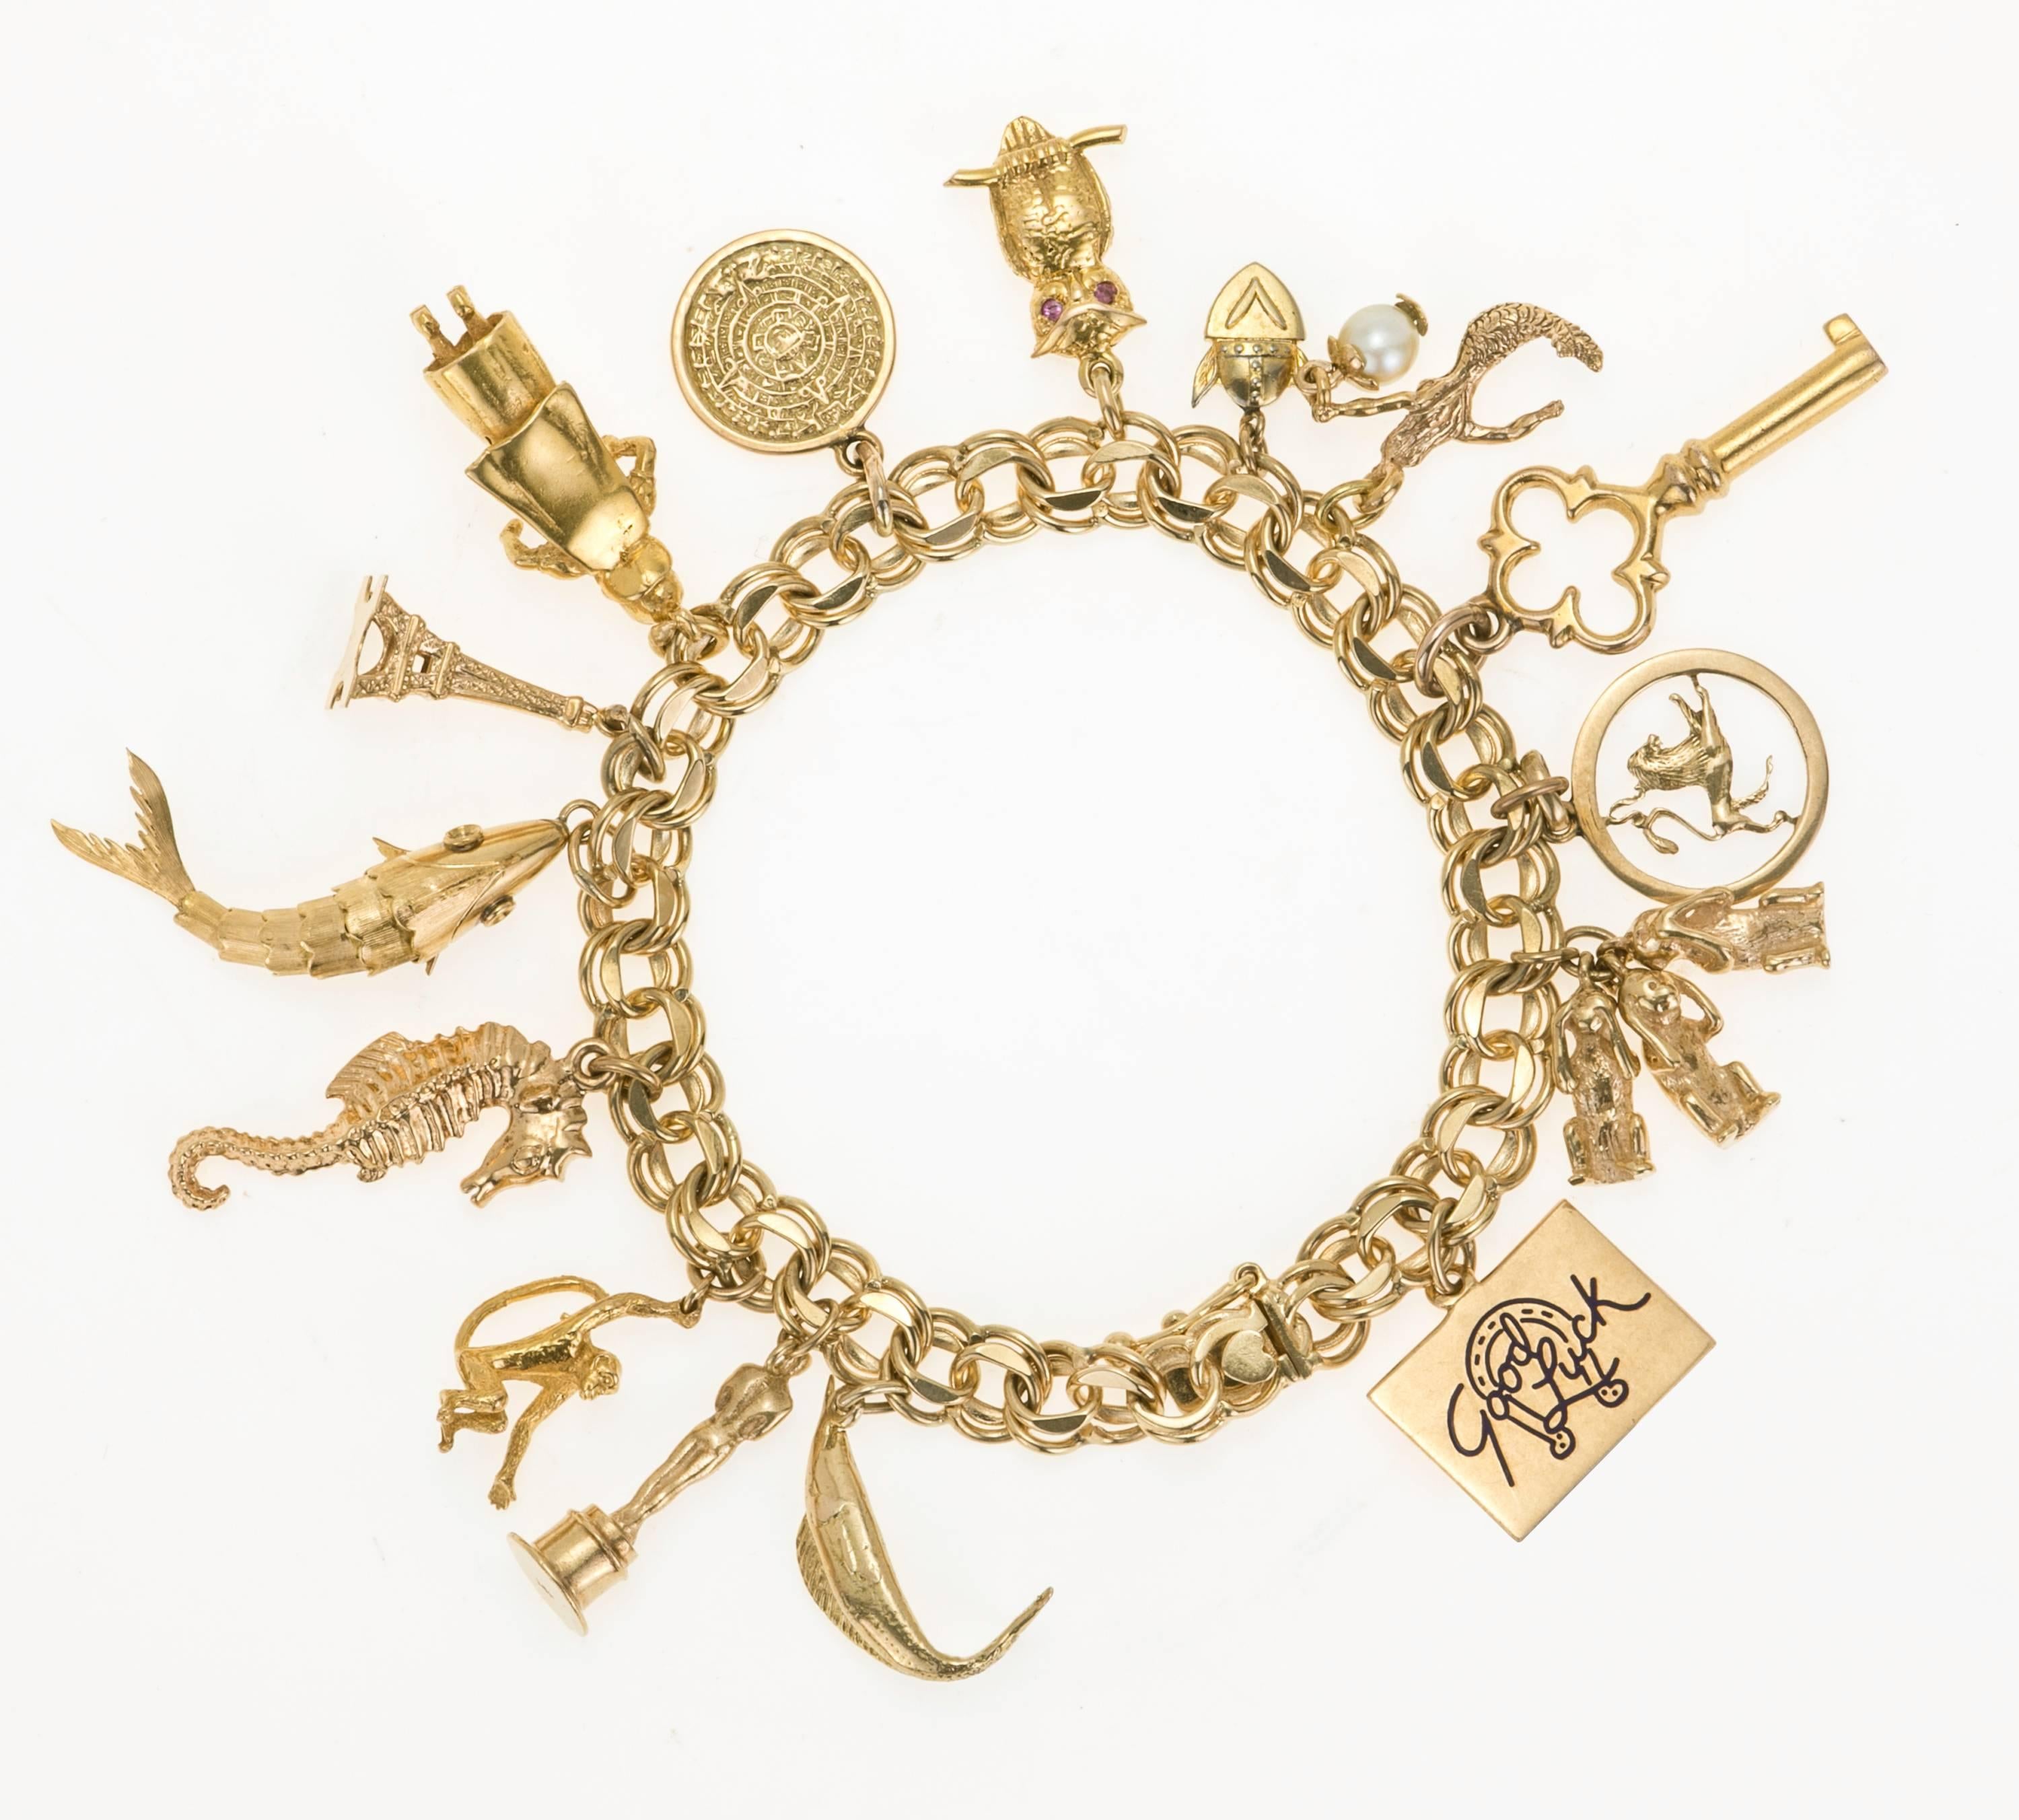   14 kt  yellow gold double chain, ladies charm bracelet with 15 charms. Following:   14 kt and enamel good luck charm, 14 kt three monkeys – see no evil -speak no evil -hear no evil. 14 kt  zodiac – Leo, 14 kt key, 14 kt mermaid and pearl , Gold